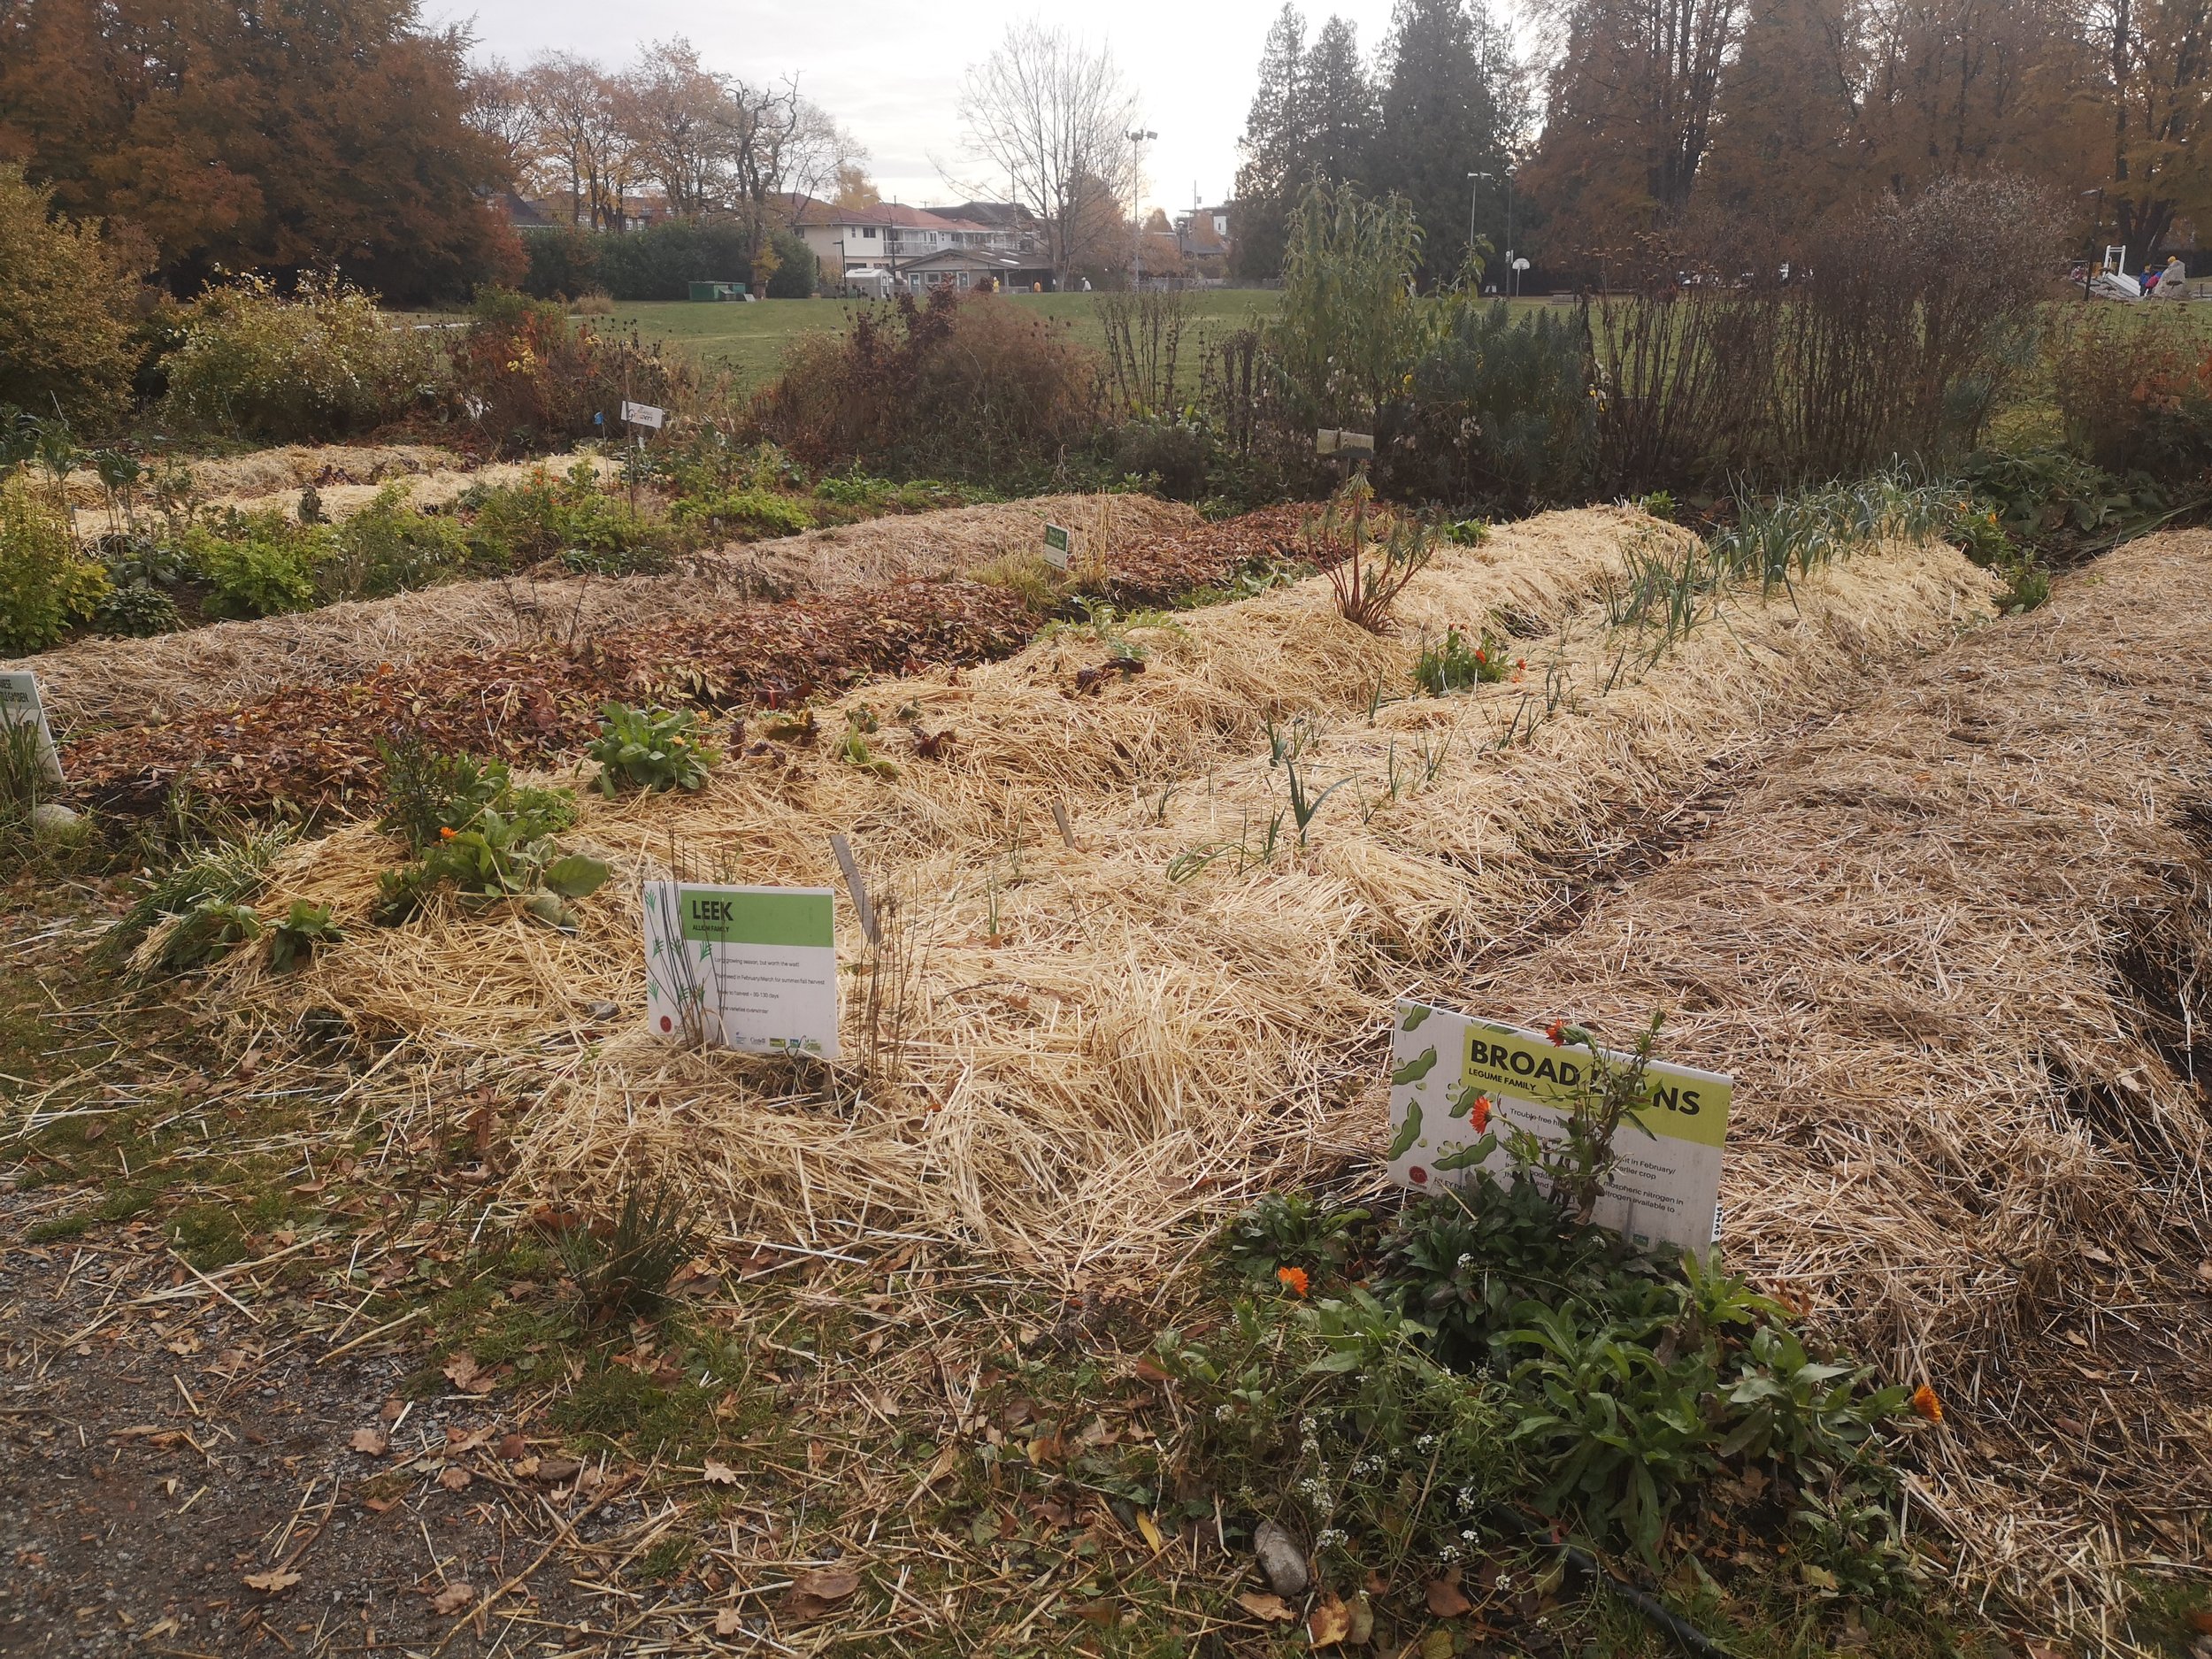  Most of the vegetable beds are covered warmly and protectively in a generous coat of mulch. Now they are ready for the winter! 